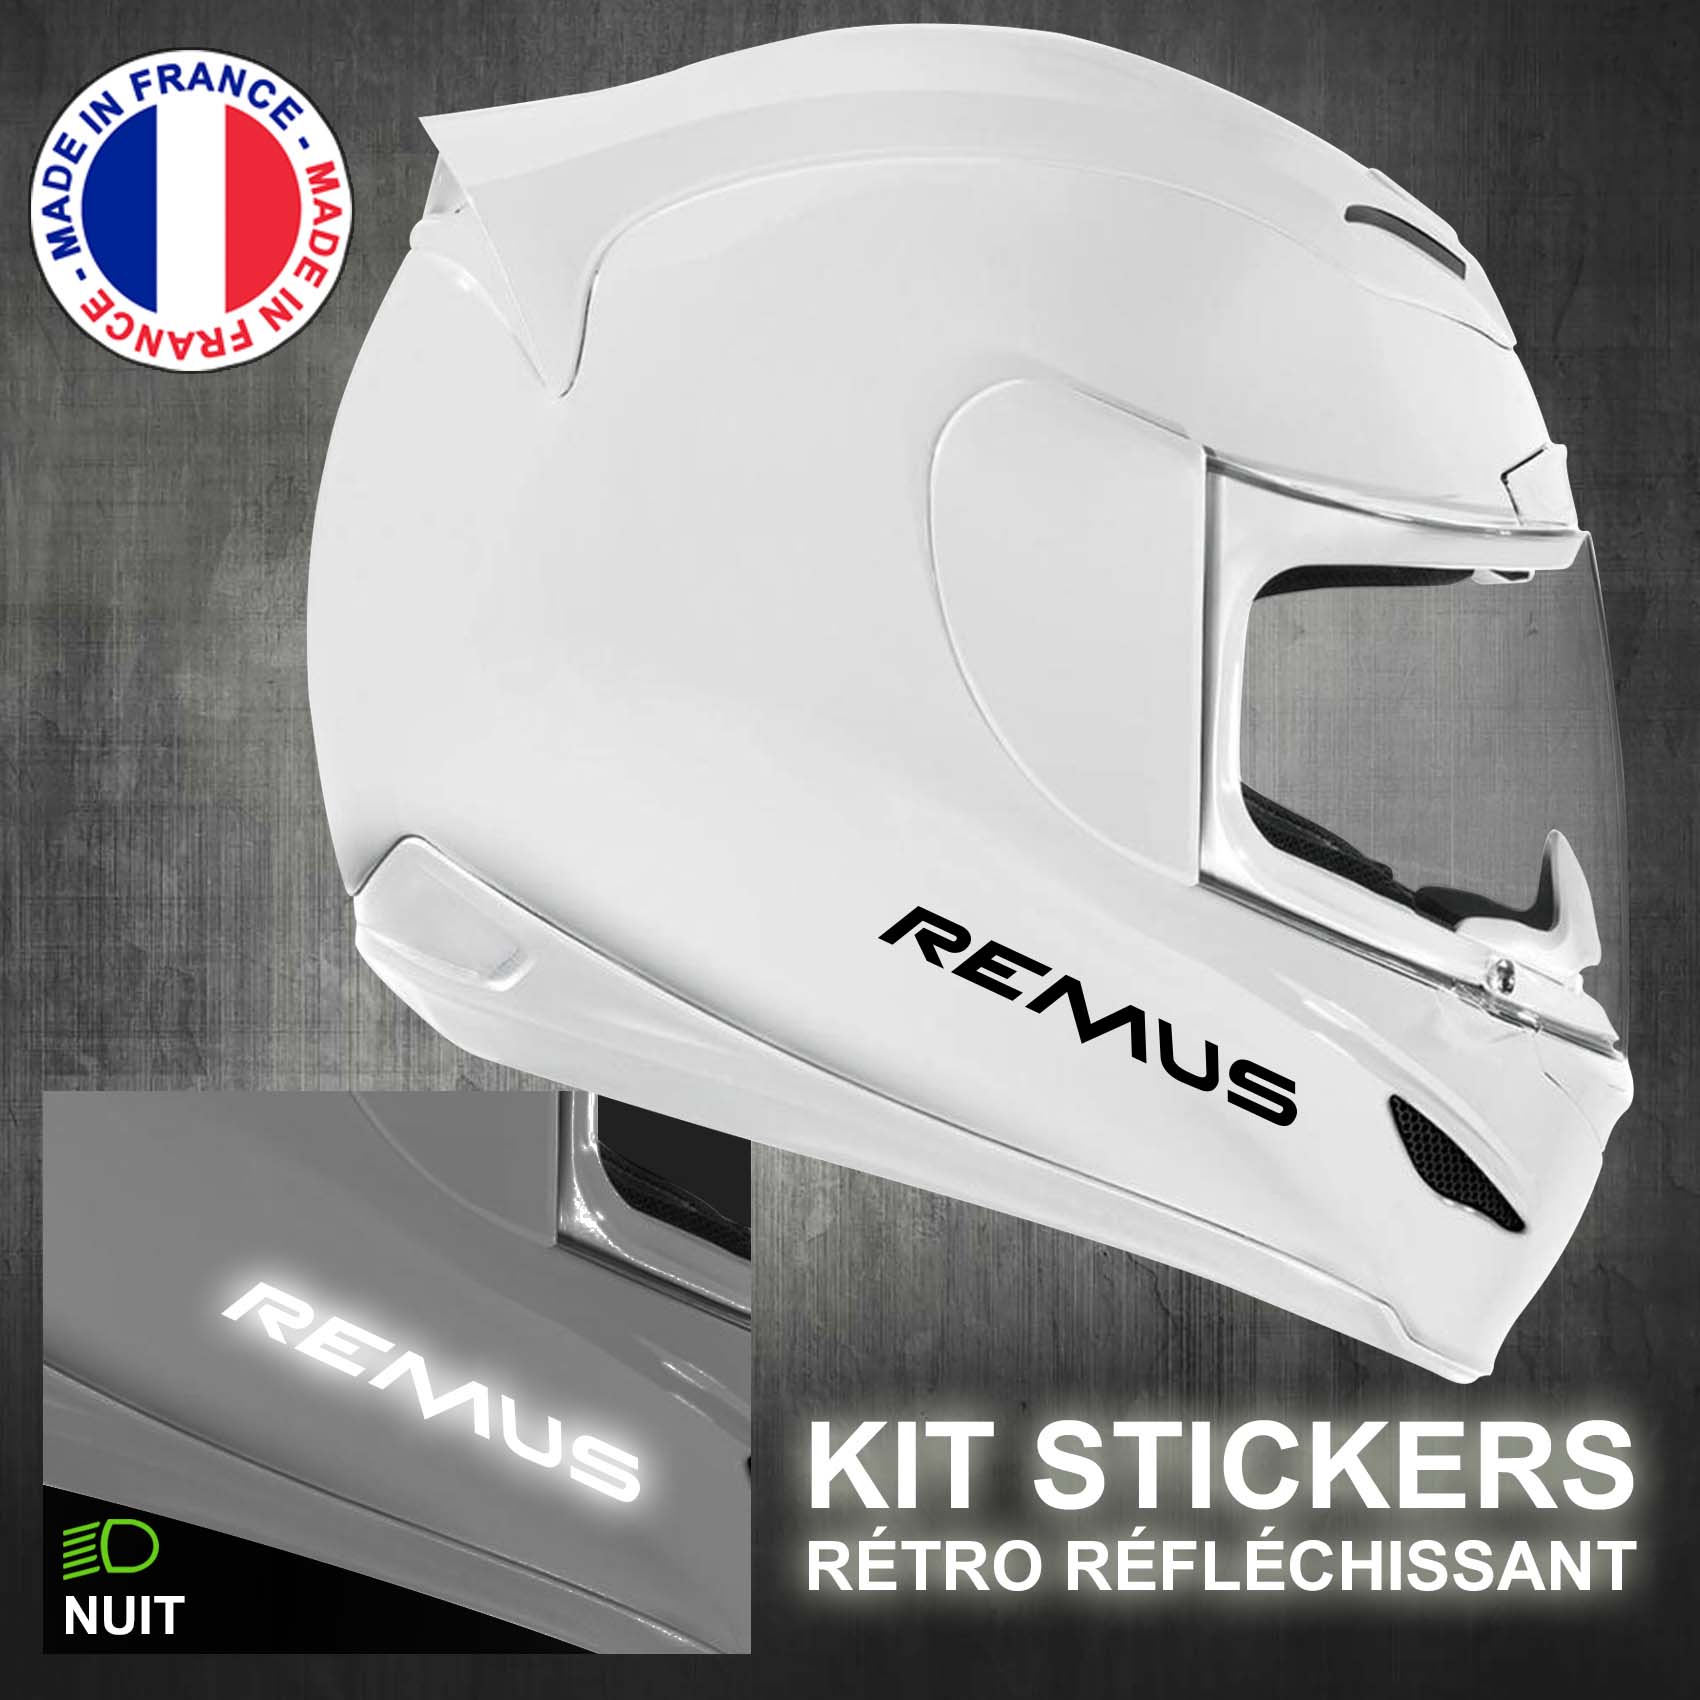 stickers-casque-moto-remus-ref2-retro-reflechissant-autocollant-moto-velo-tuning-racing-route-sticker-casques-adhesif-scooter-nuit-securite-decals-personnalise-personnalisable-min